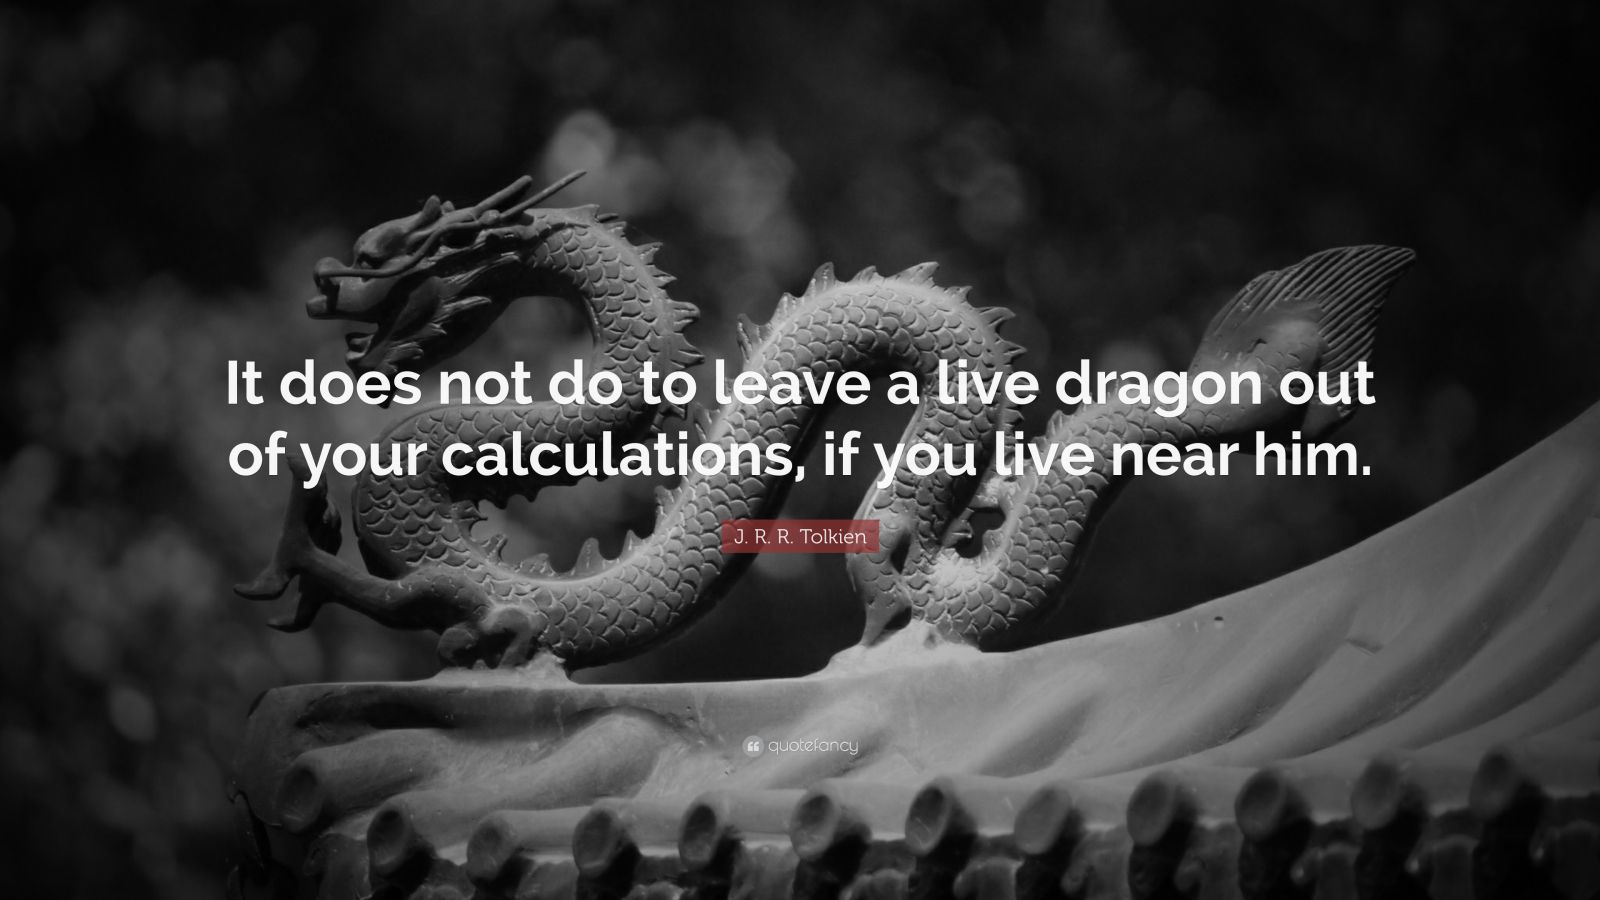 J. R. R. Tolkien Quote: “It does not do to leave a live dragon out of